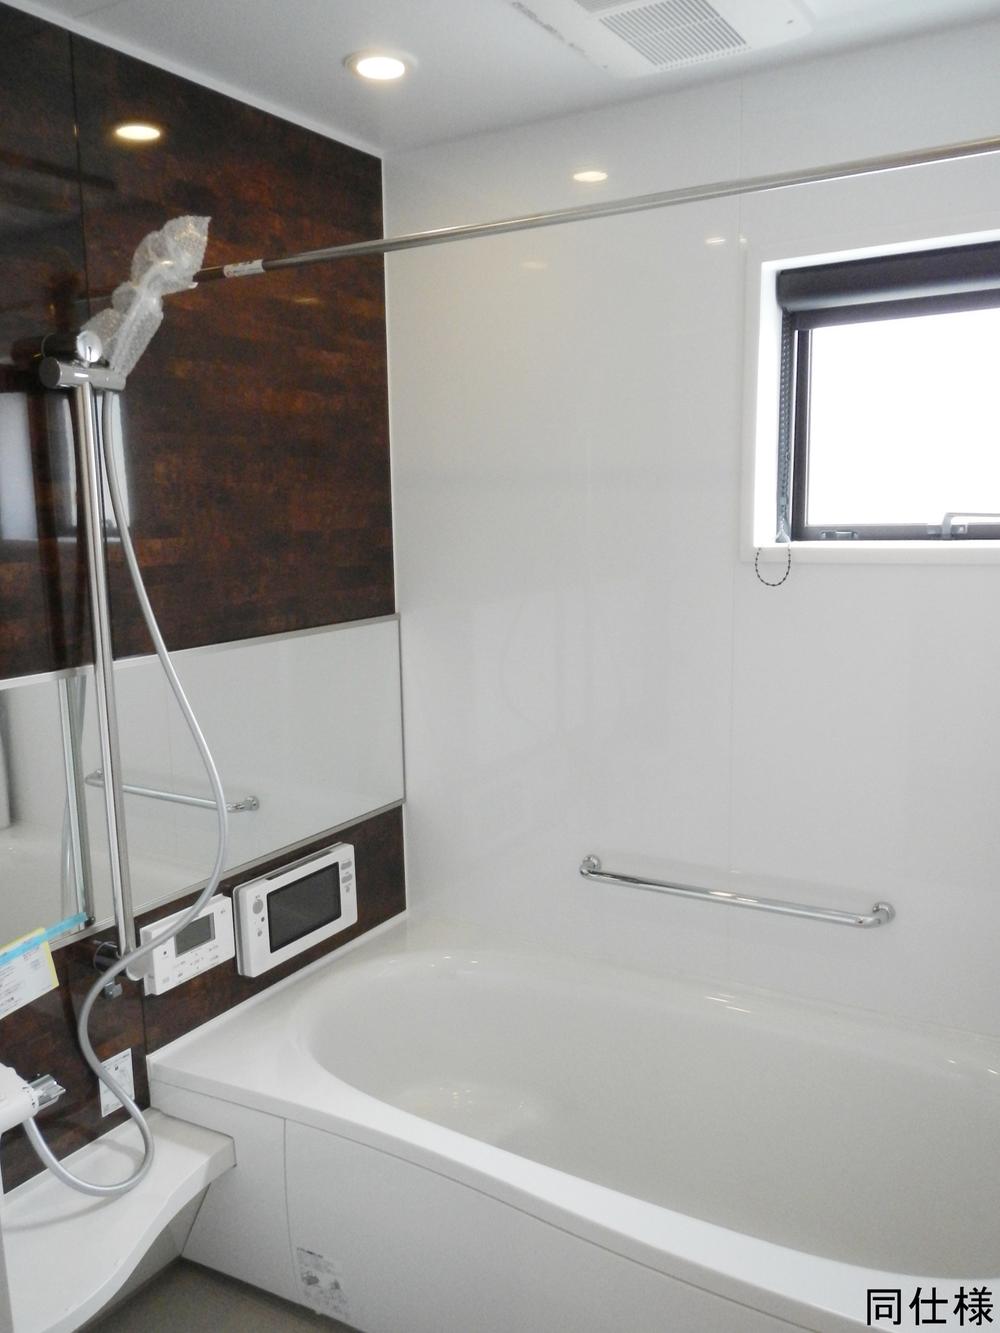 Bathroom. Spacious relaxing bath that also attached bathroom digital TV is, Has a higher thermal insulation does not fall only be 2 ℃ after 5 hours! You can also save utility costs also can shorten the time of reheating